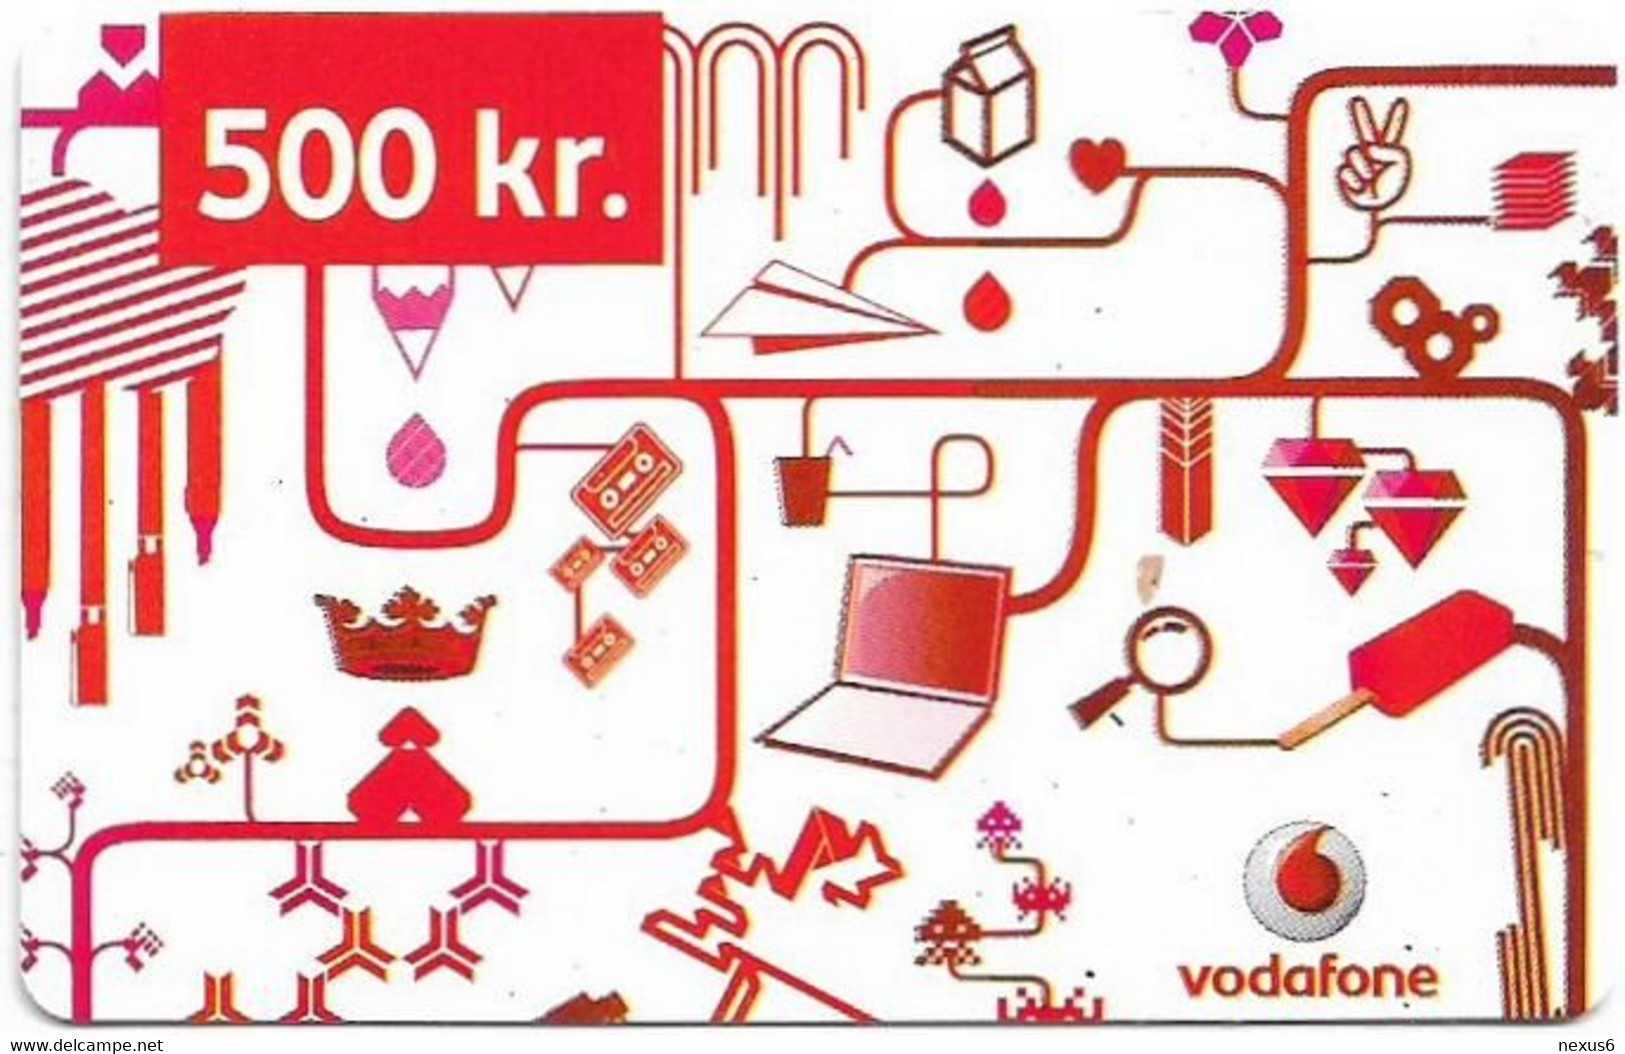 Iceland - Vodafone - Various Objects (Red), Exp.03.06.2009, GSM Refill 500Kr, Used - Islande